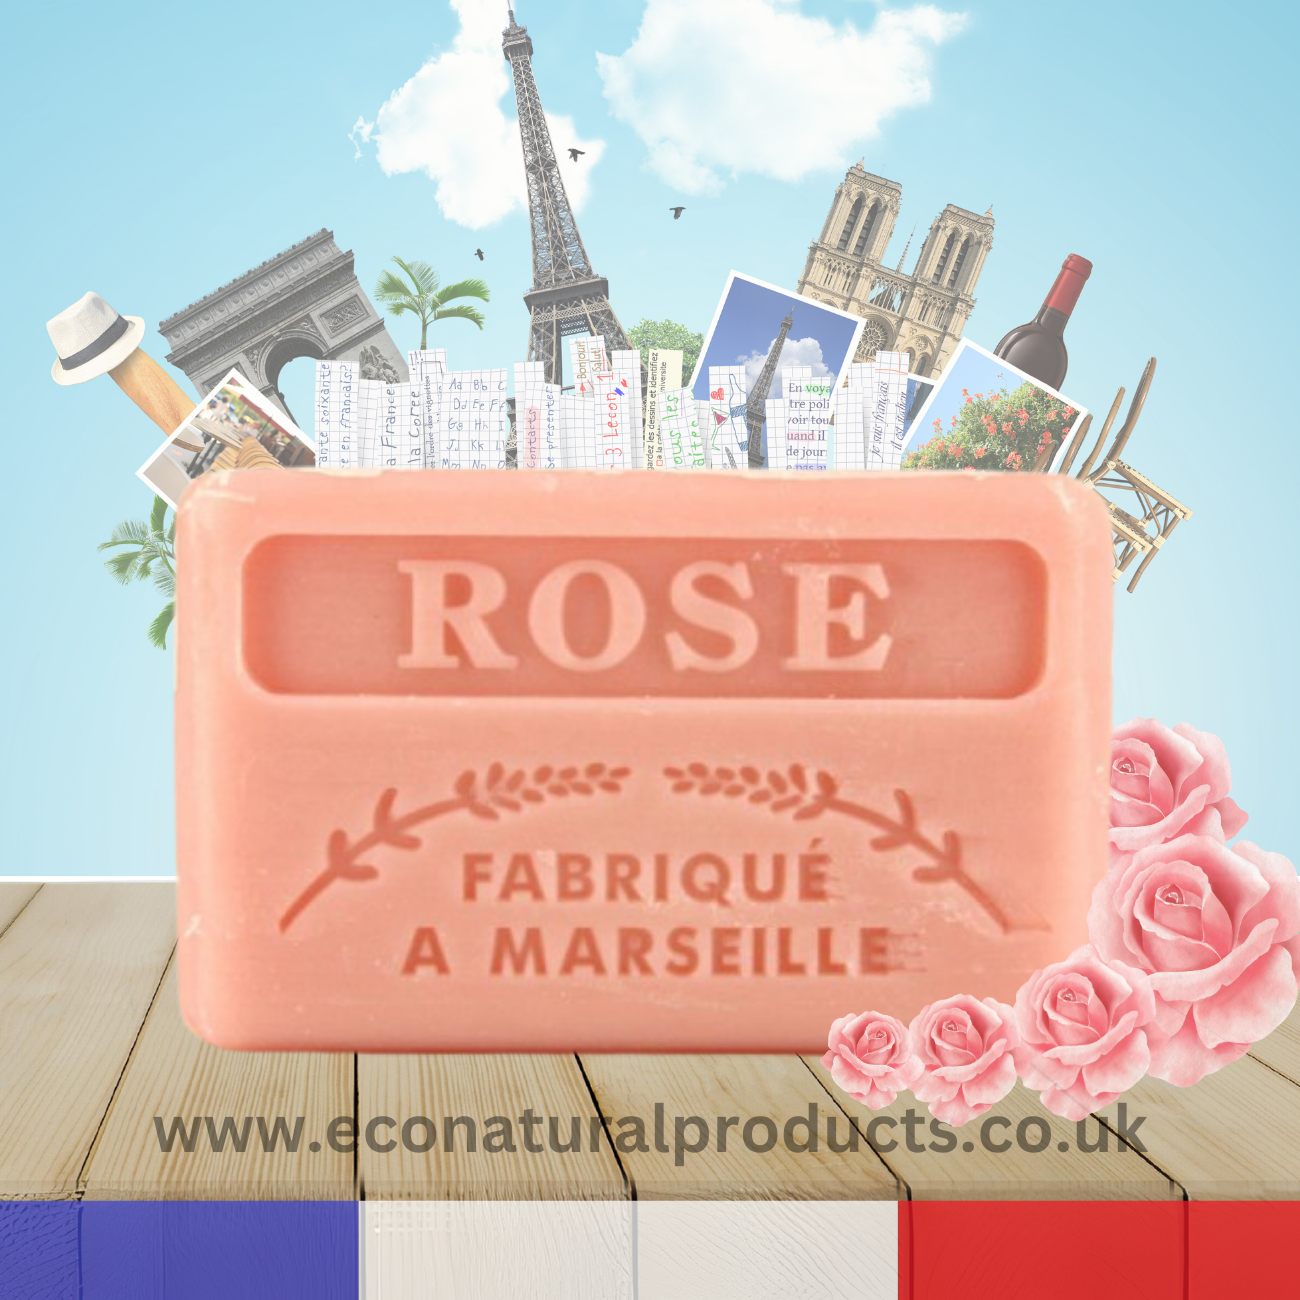 French Marseille Soap Rose 125g